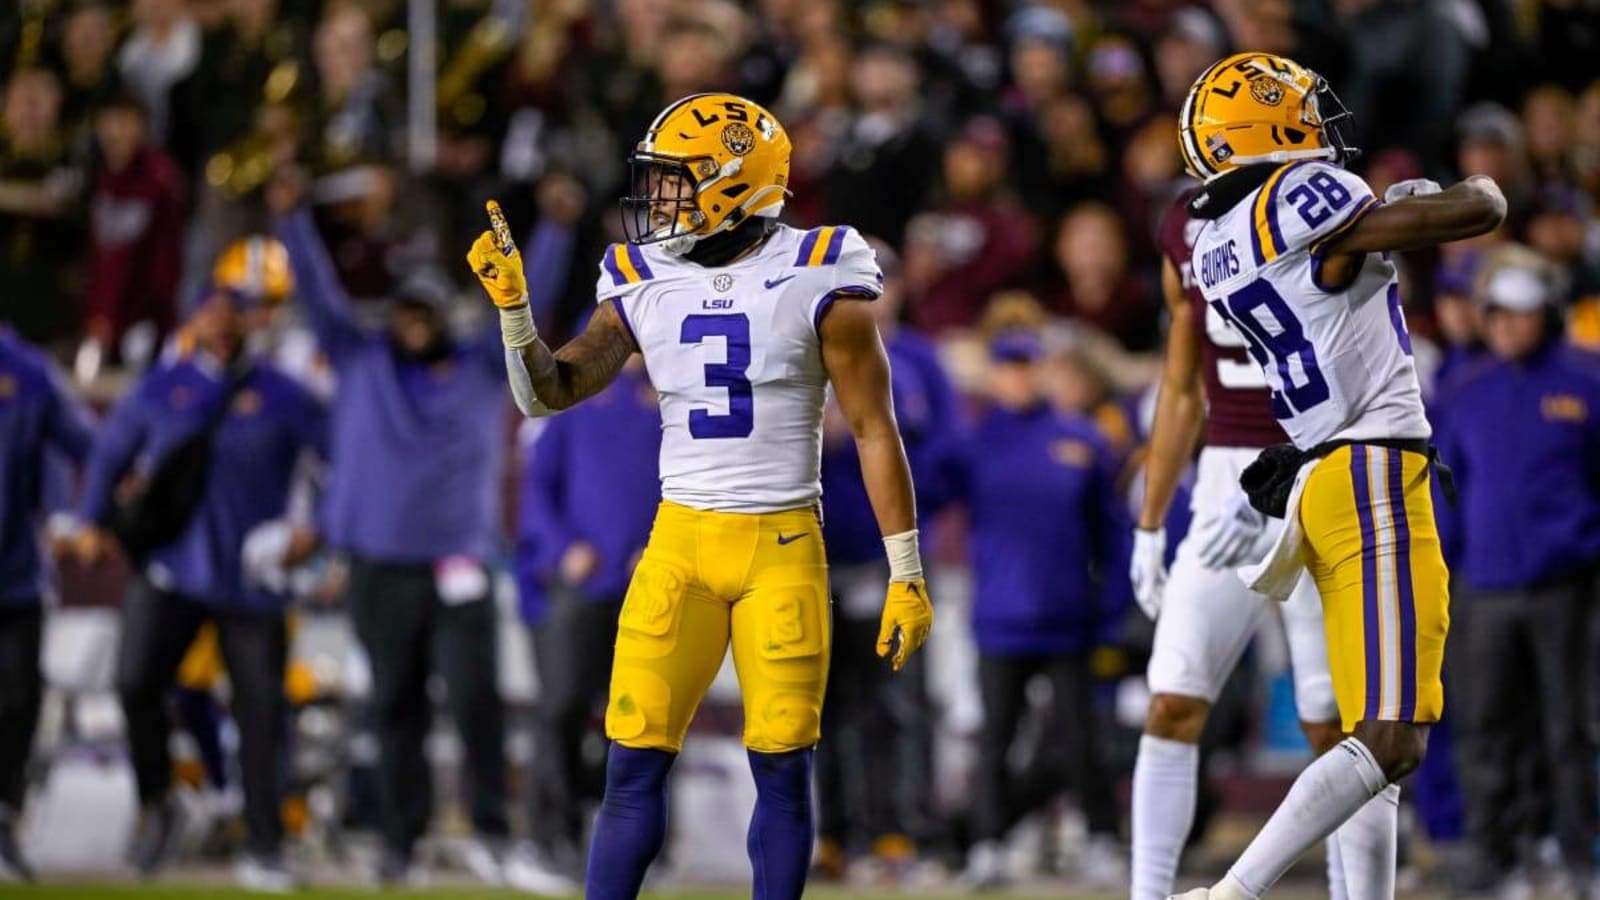 LSU Football: Safety Greg Brooks Diagnosed With Rare Form Of Brain Cancer